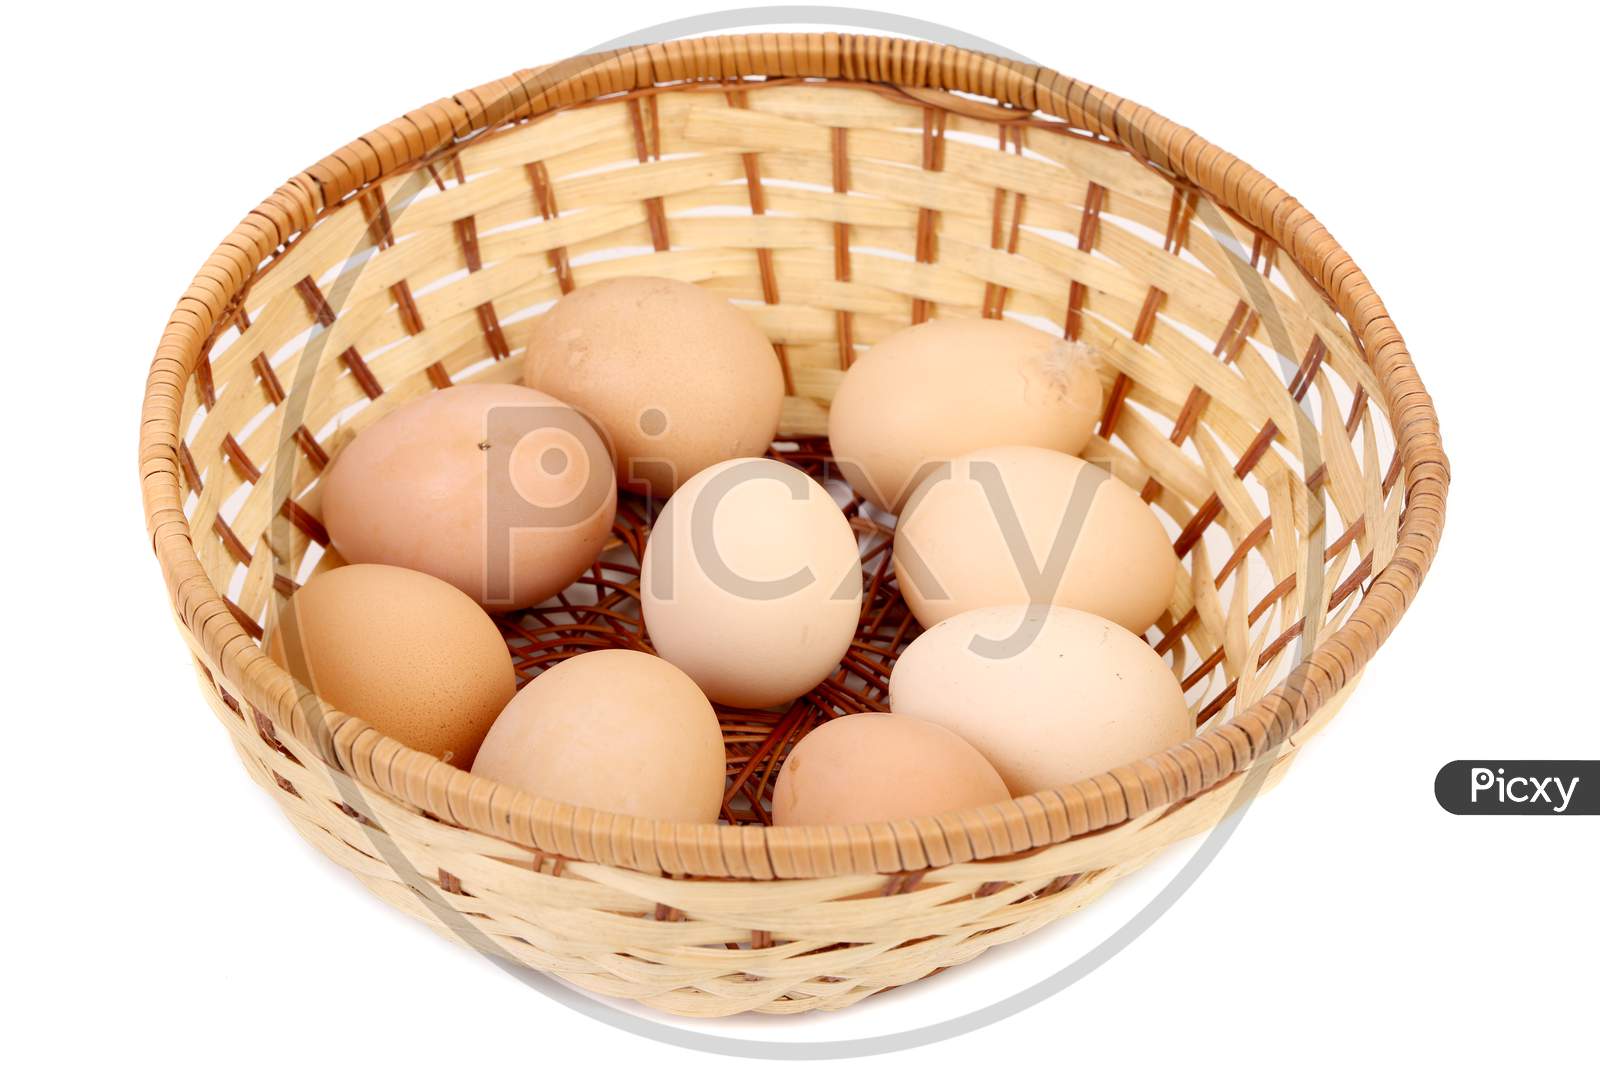 Eggs In Basket. Isolated On A White Background.